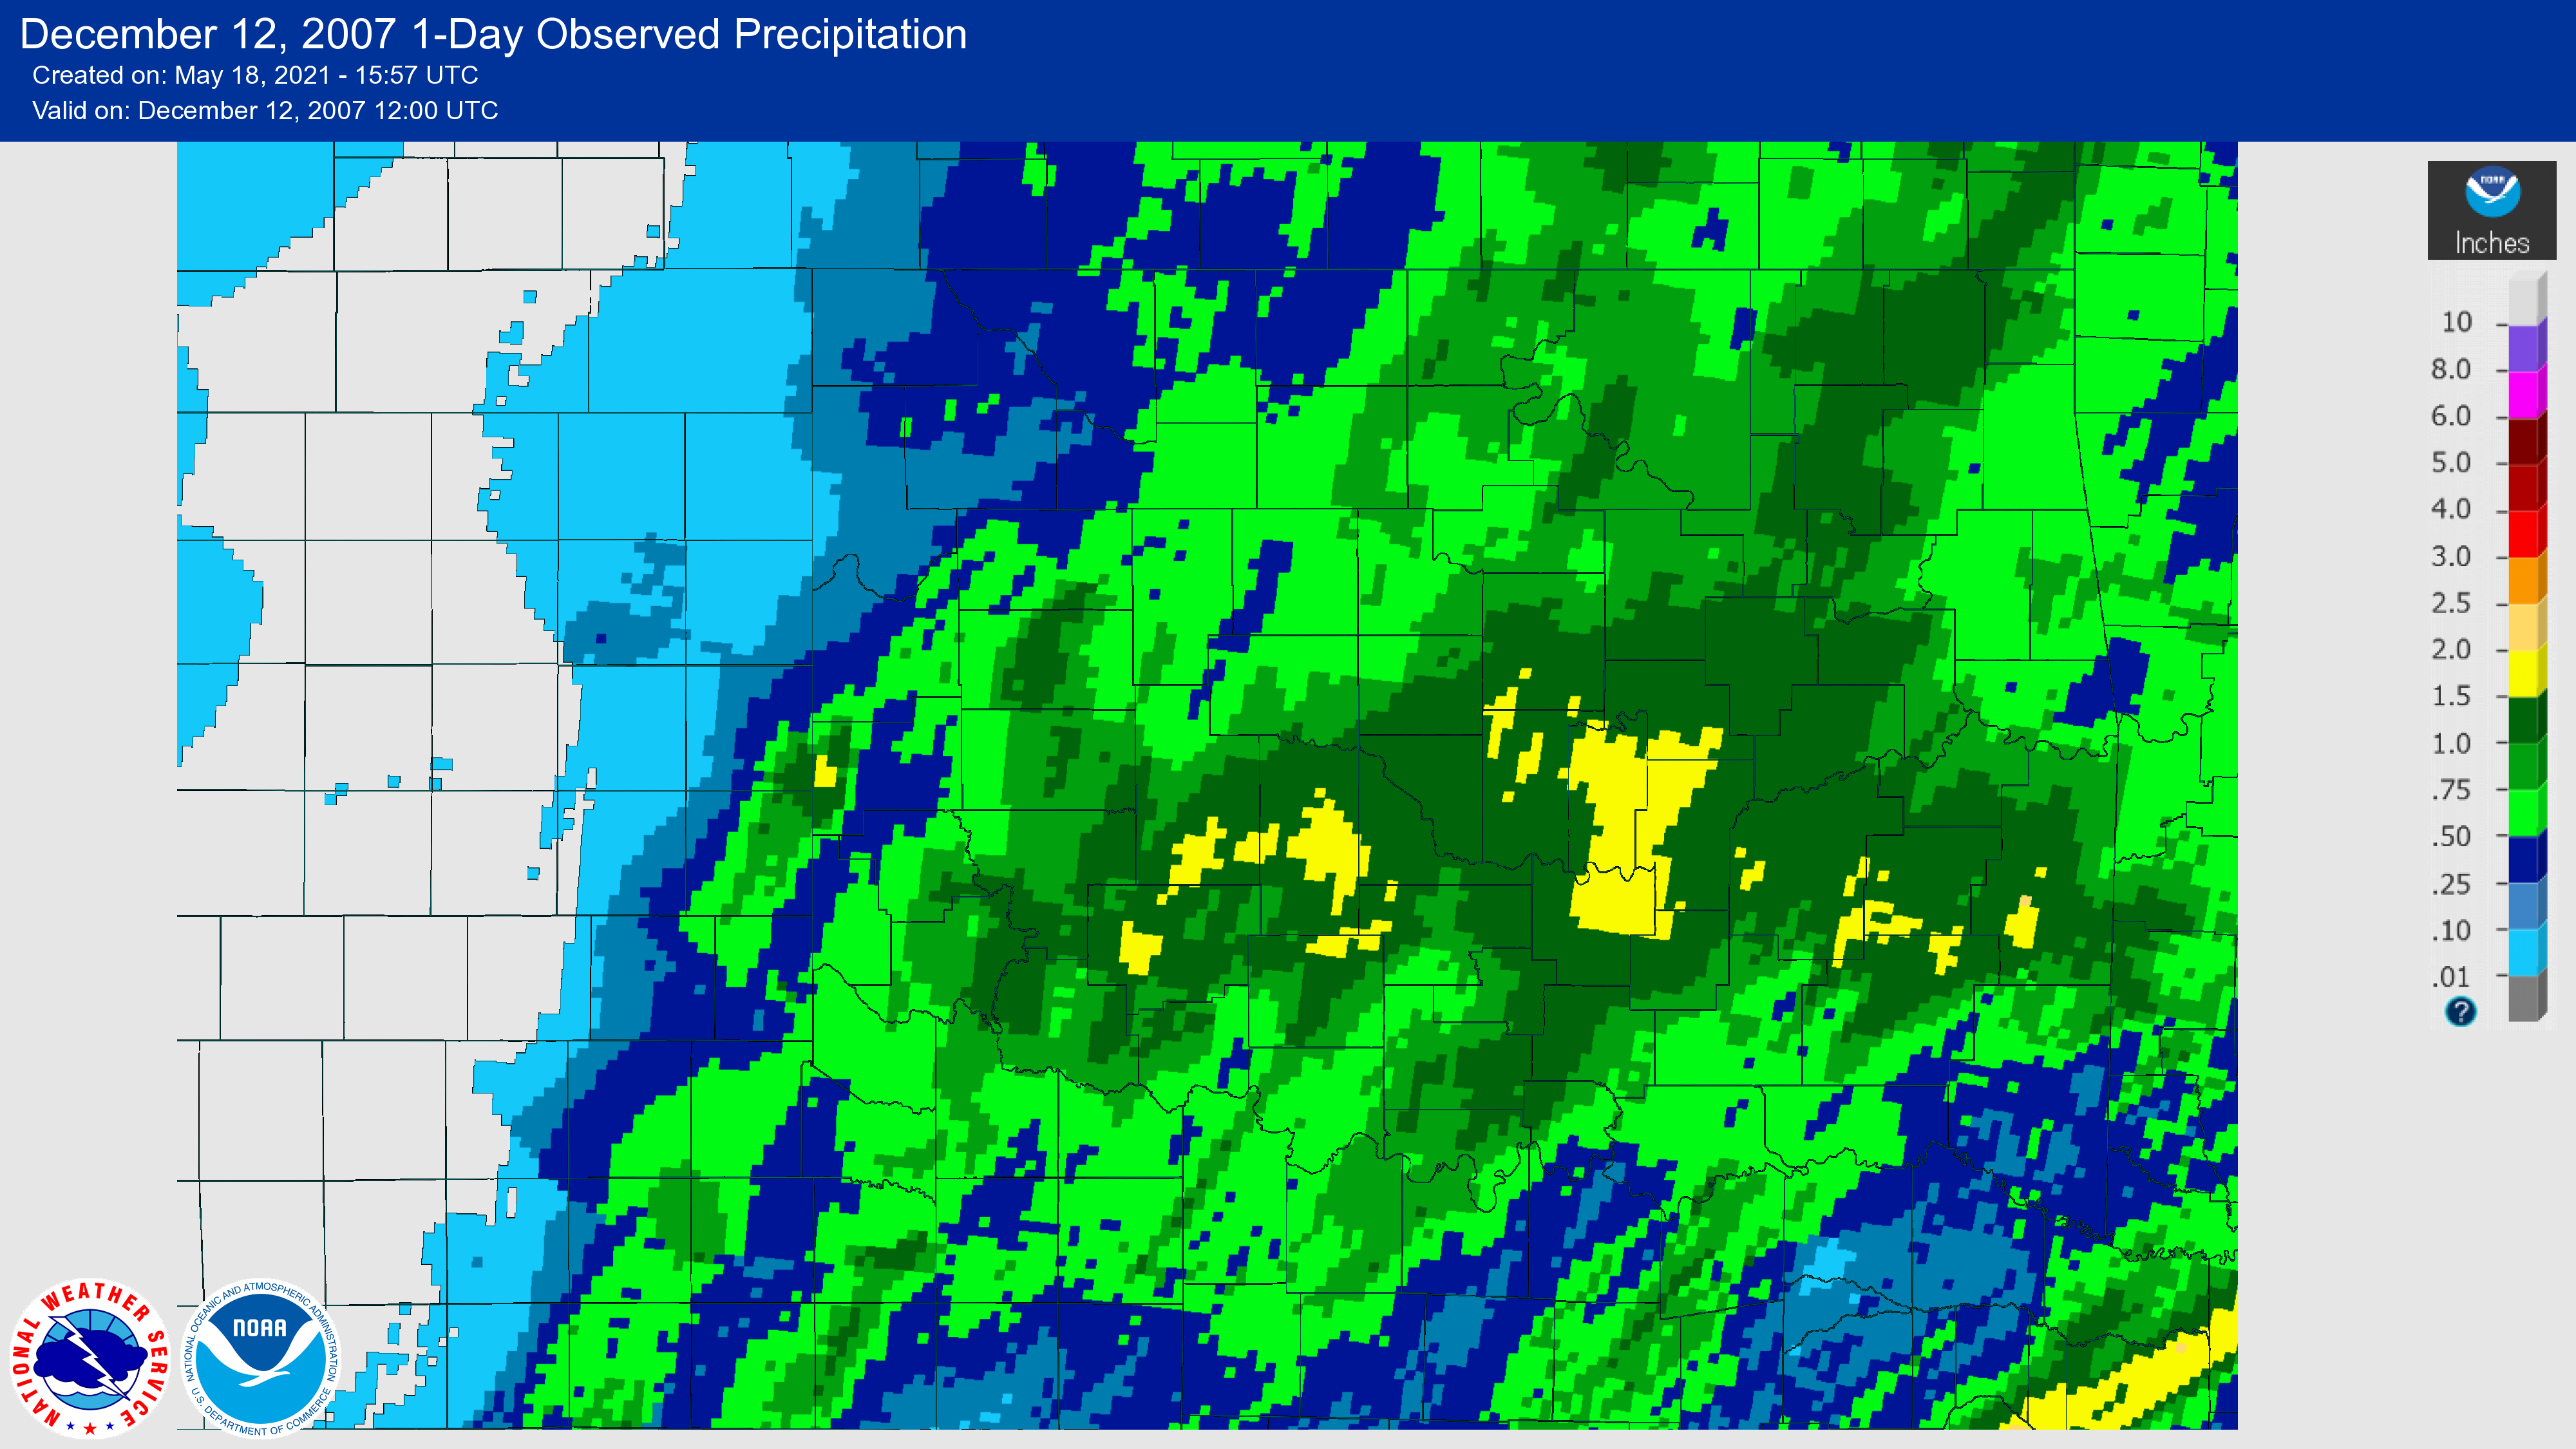 24-hour Precipitation Total ending at 6:00 AM CST on December 12, 2007 for the NWS Norman, Oklahoma Forecast Area